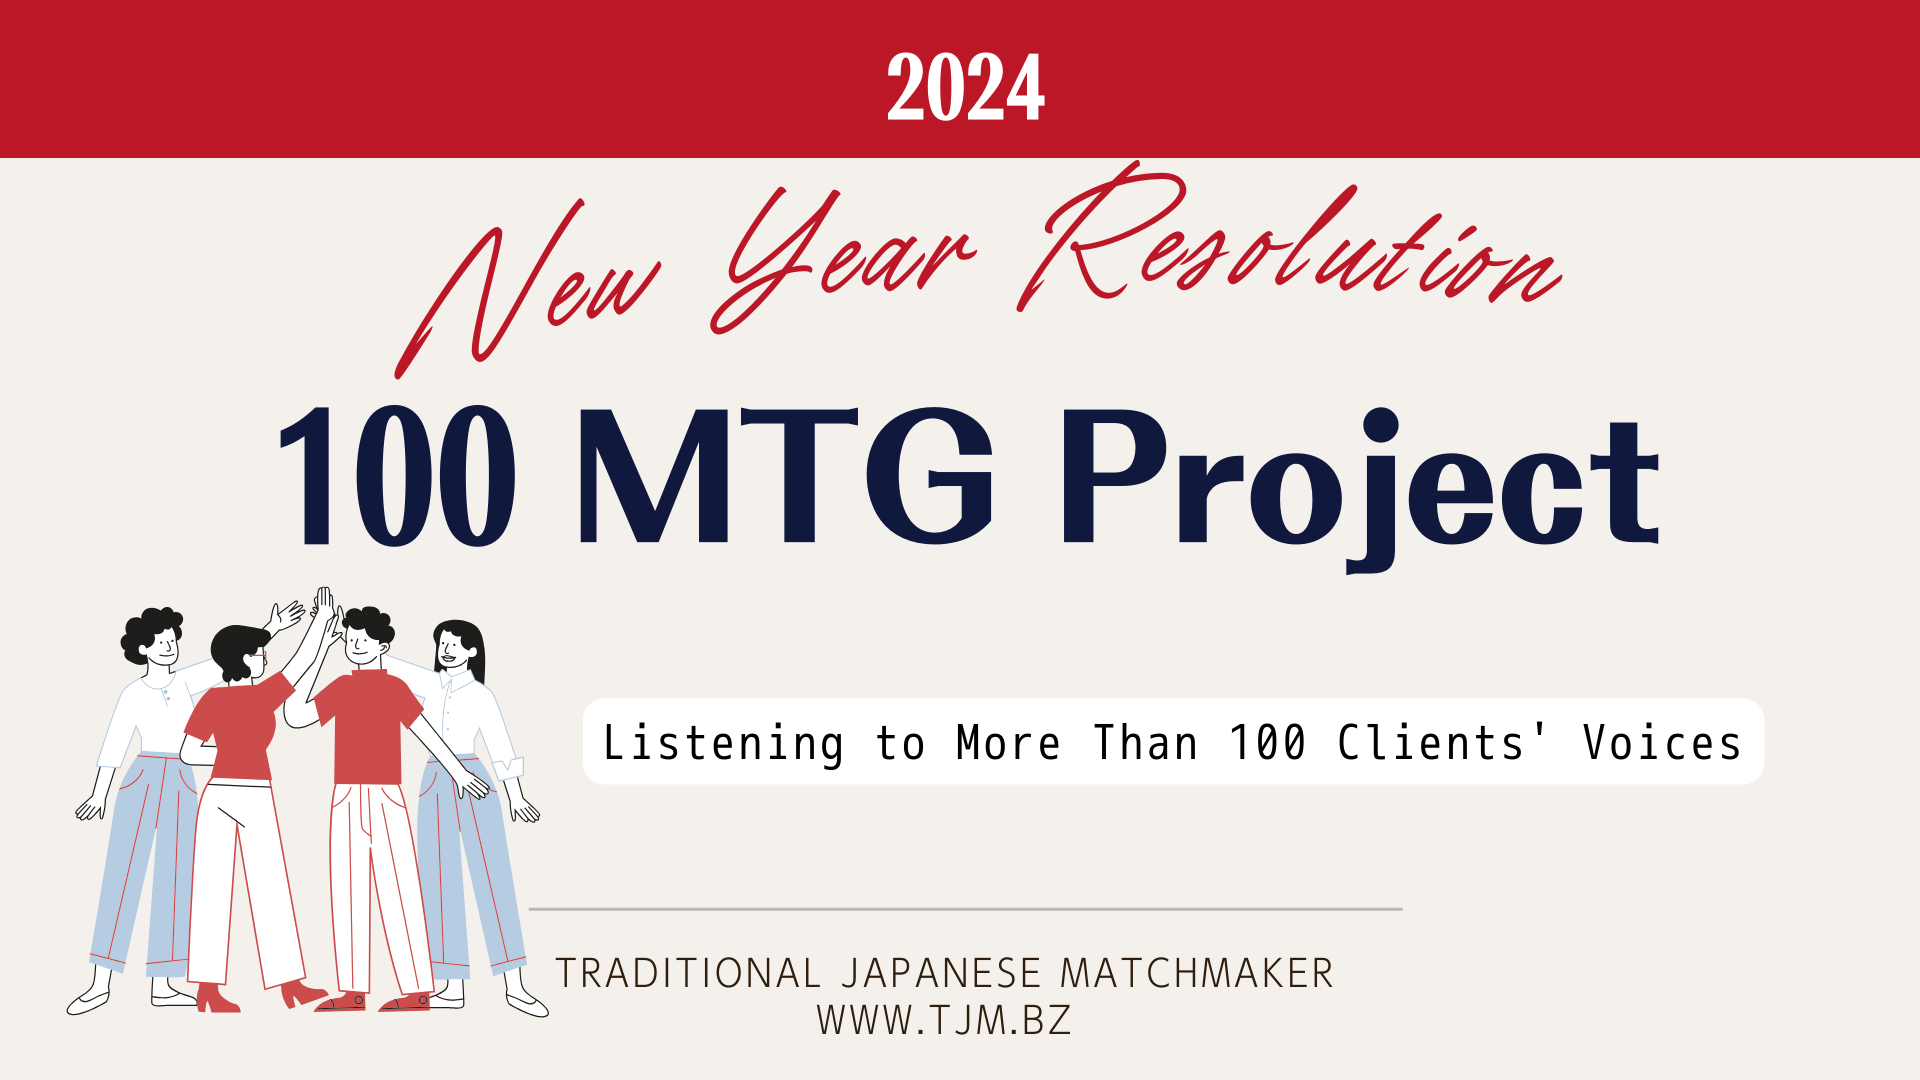 Traditional Japanese Matchmaker's New Year Resolution for 2024 -3